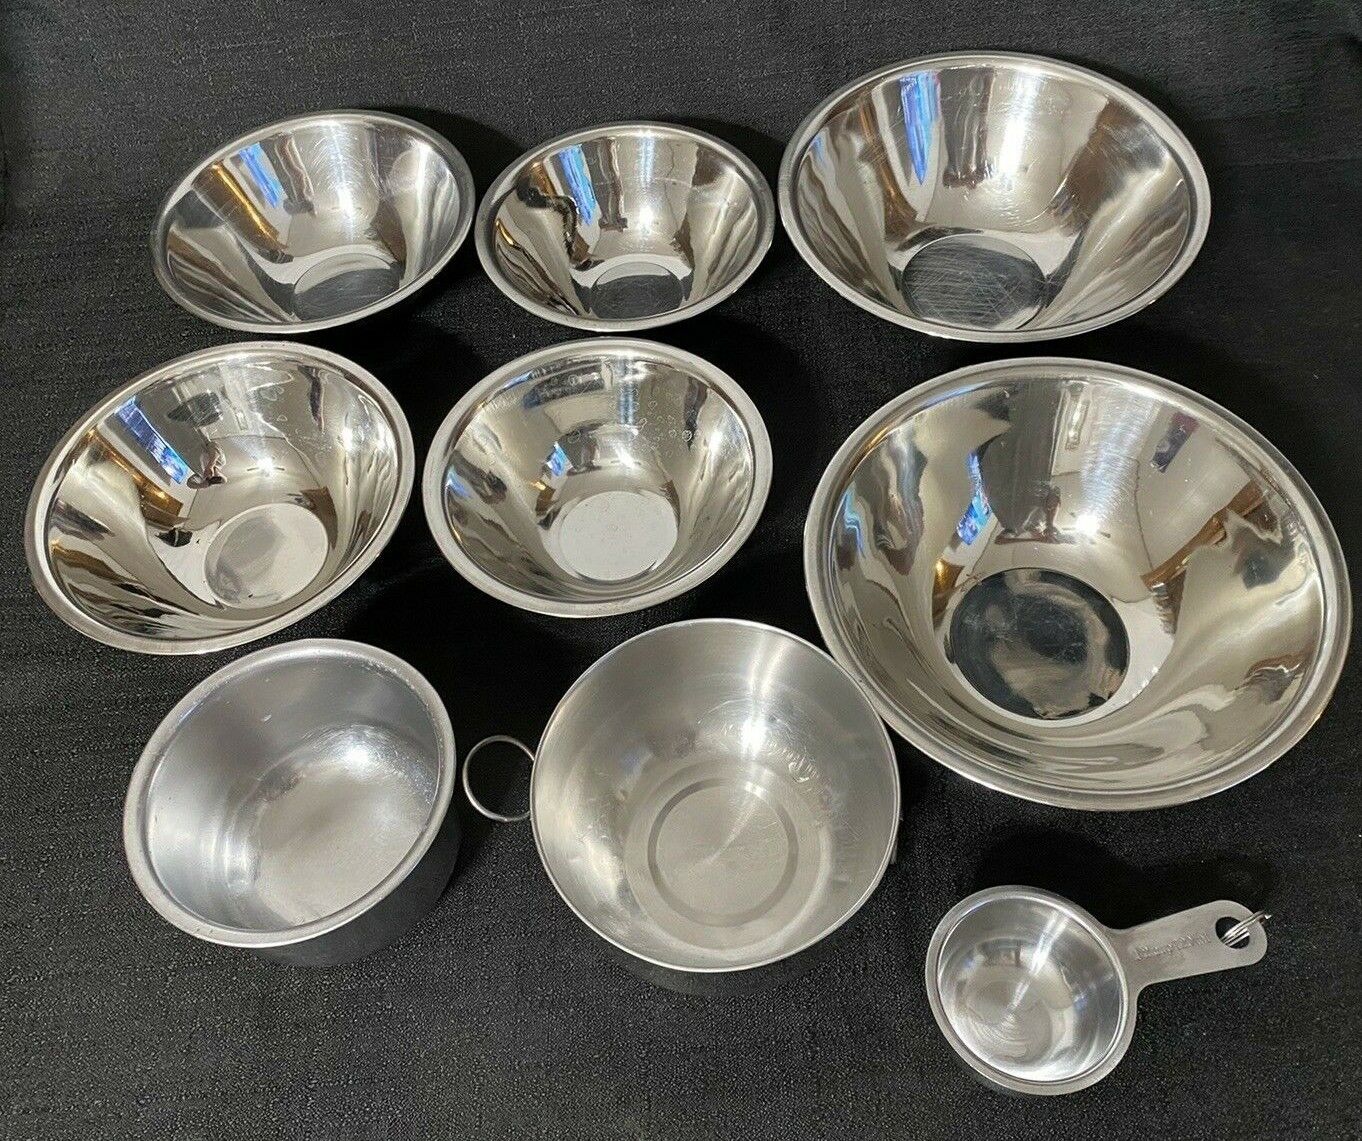 Set of 8 Vintage Stainless Steel Nesting Mixing Bowls